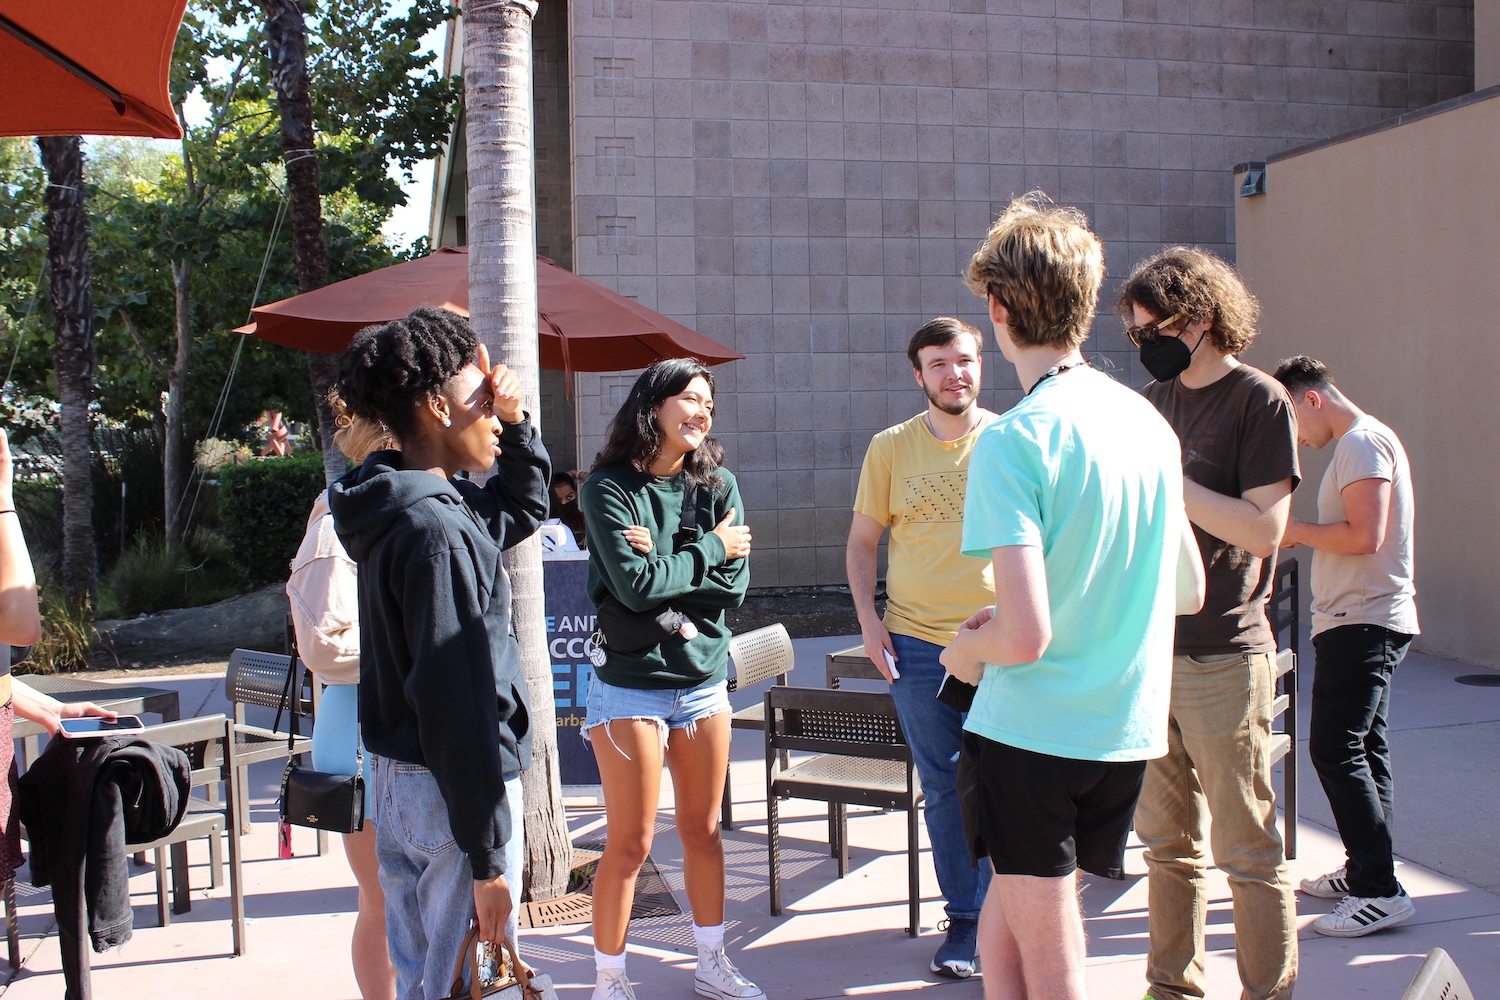 group of students standing in a semi circle outside, listening to another student speak